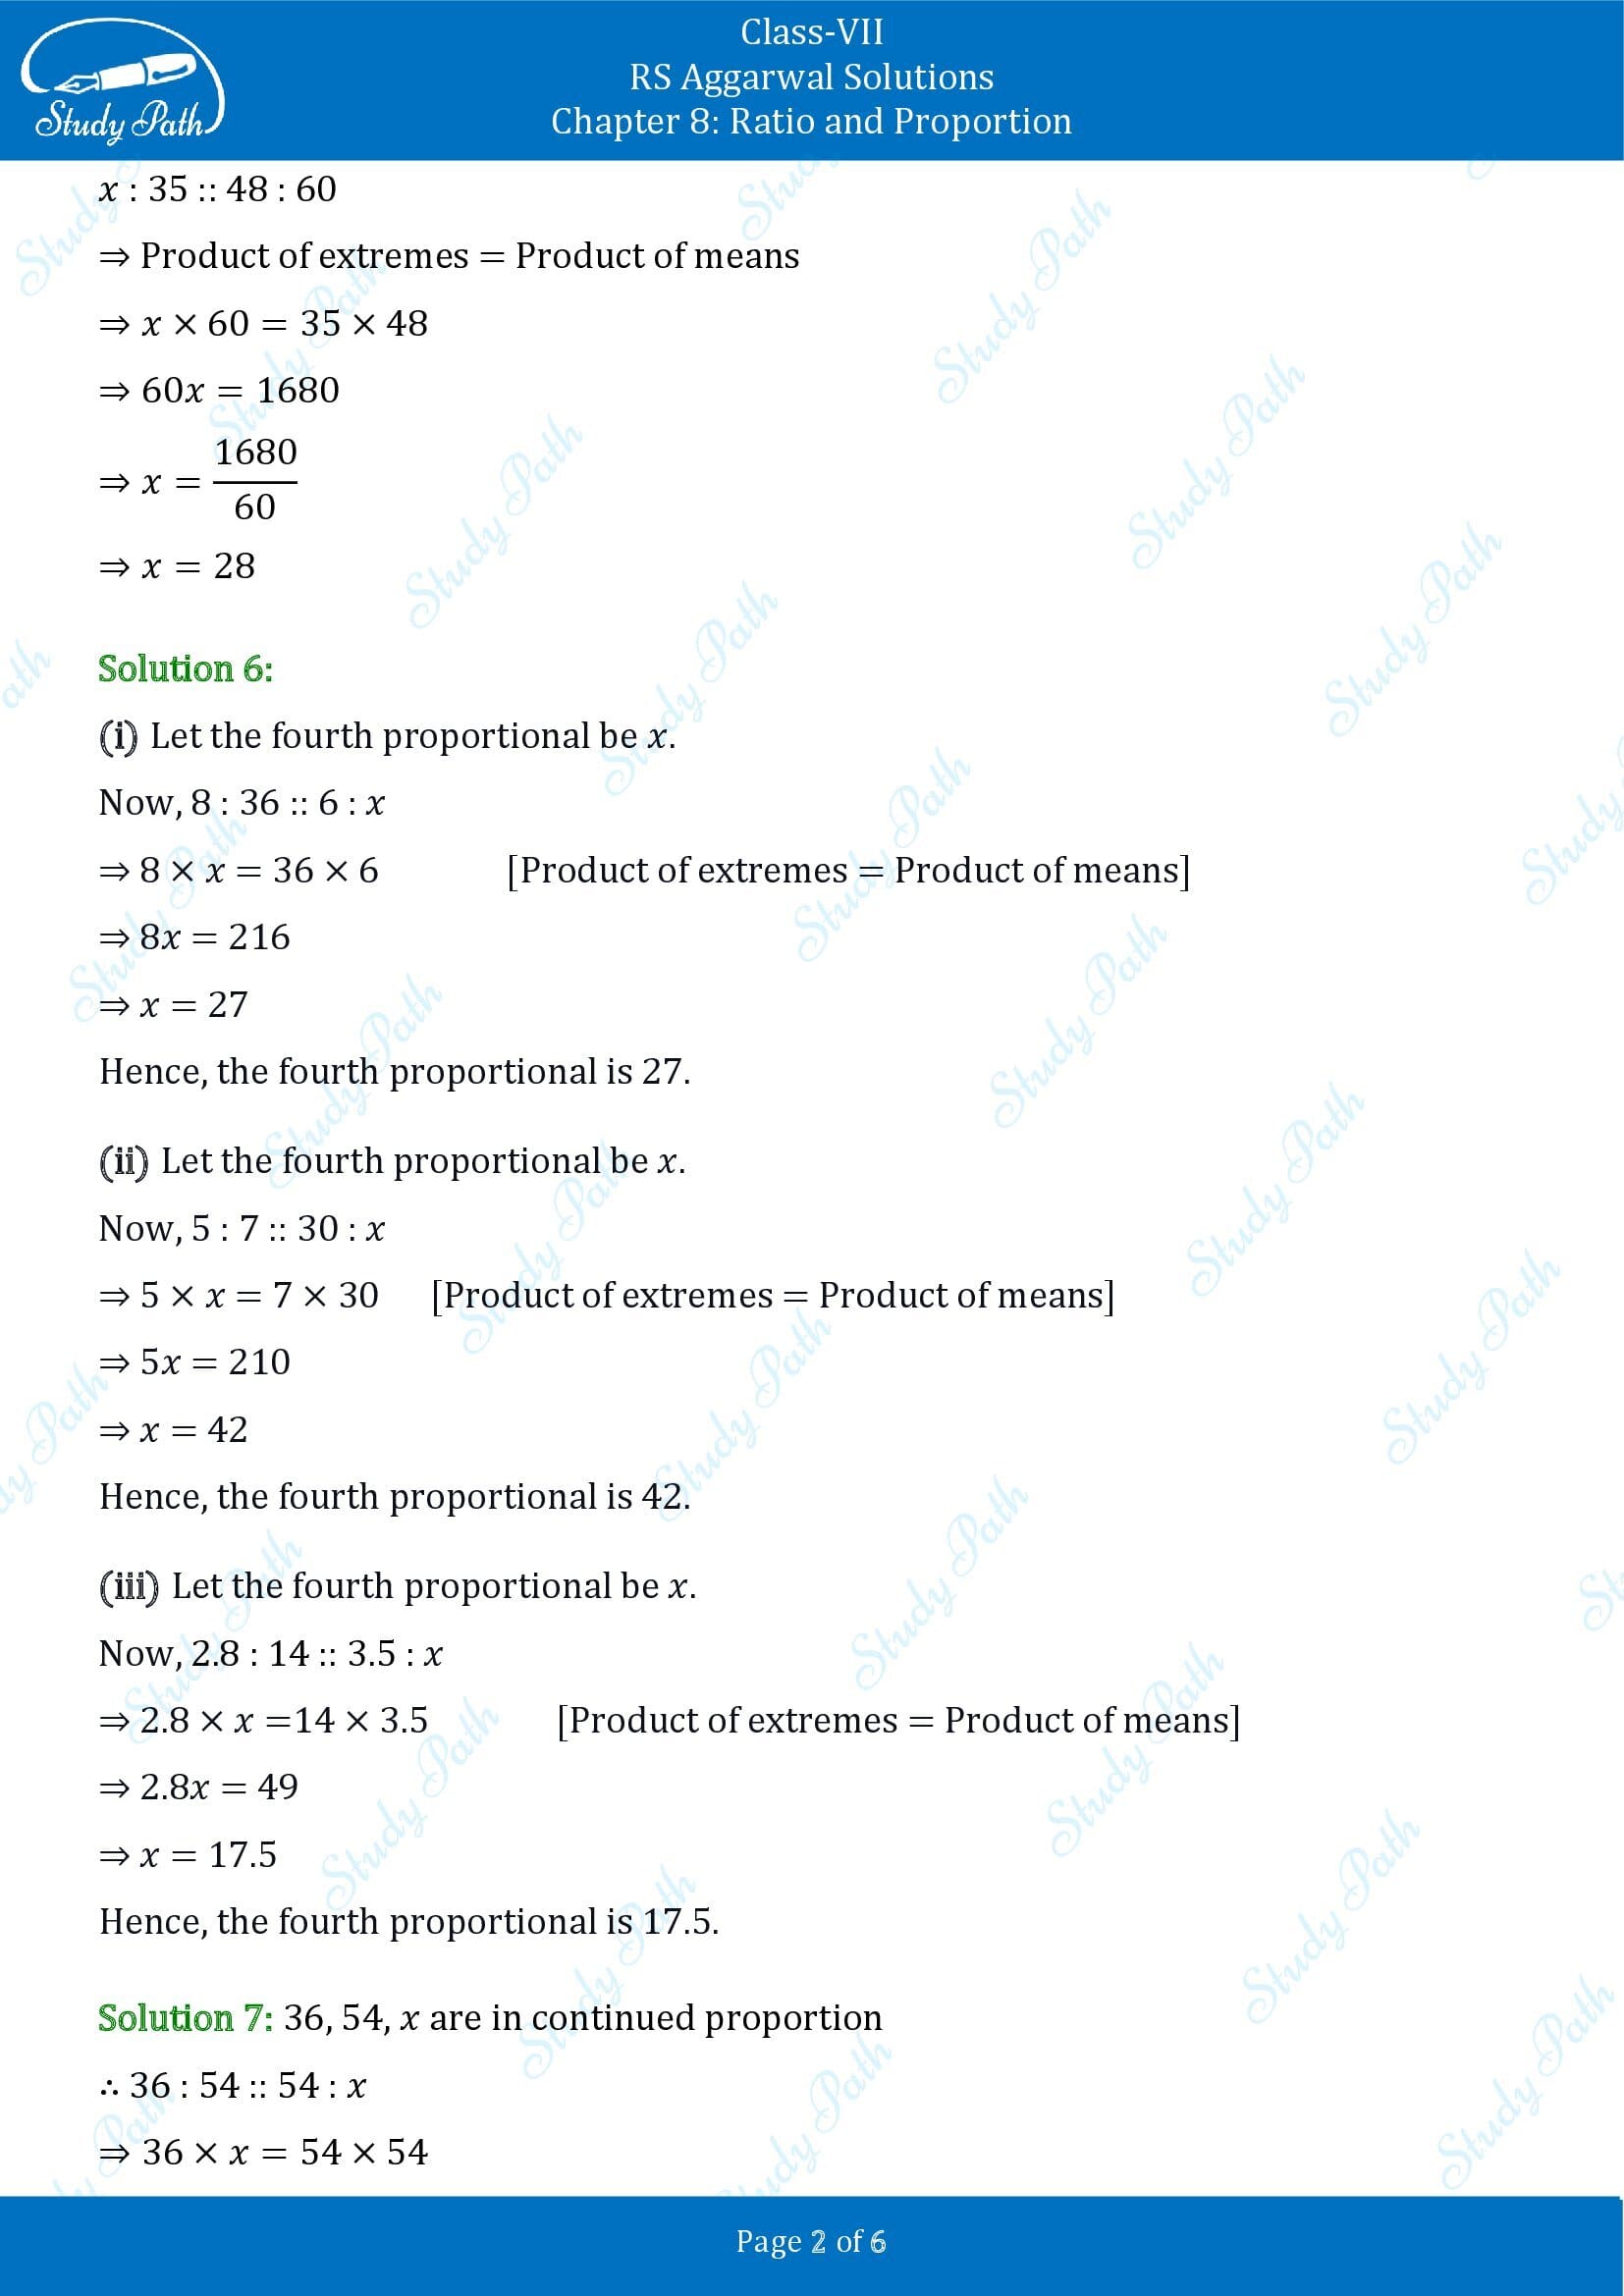 RS Aggarwal Solutions Class 7 Chapter 8 Ratio and Proportion Exercise 8B 00002